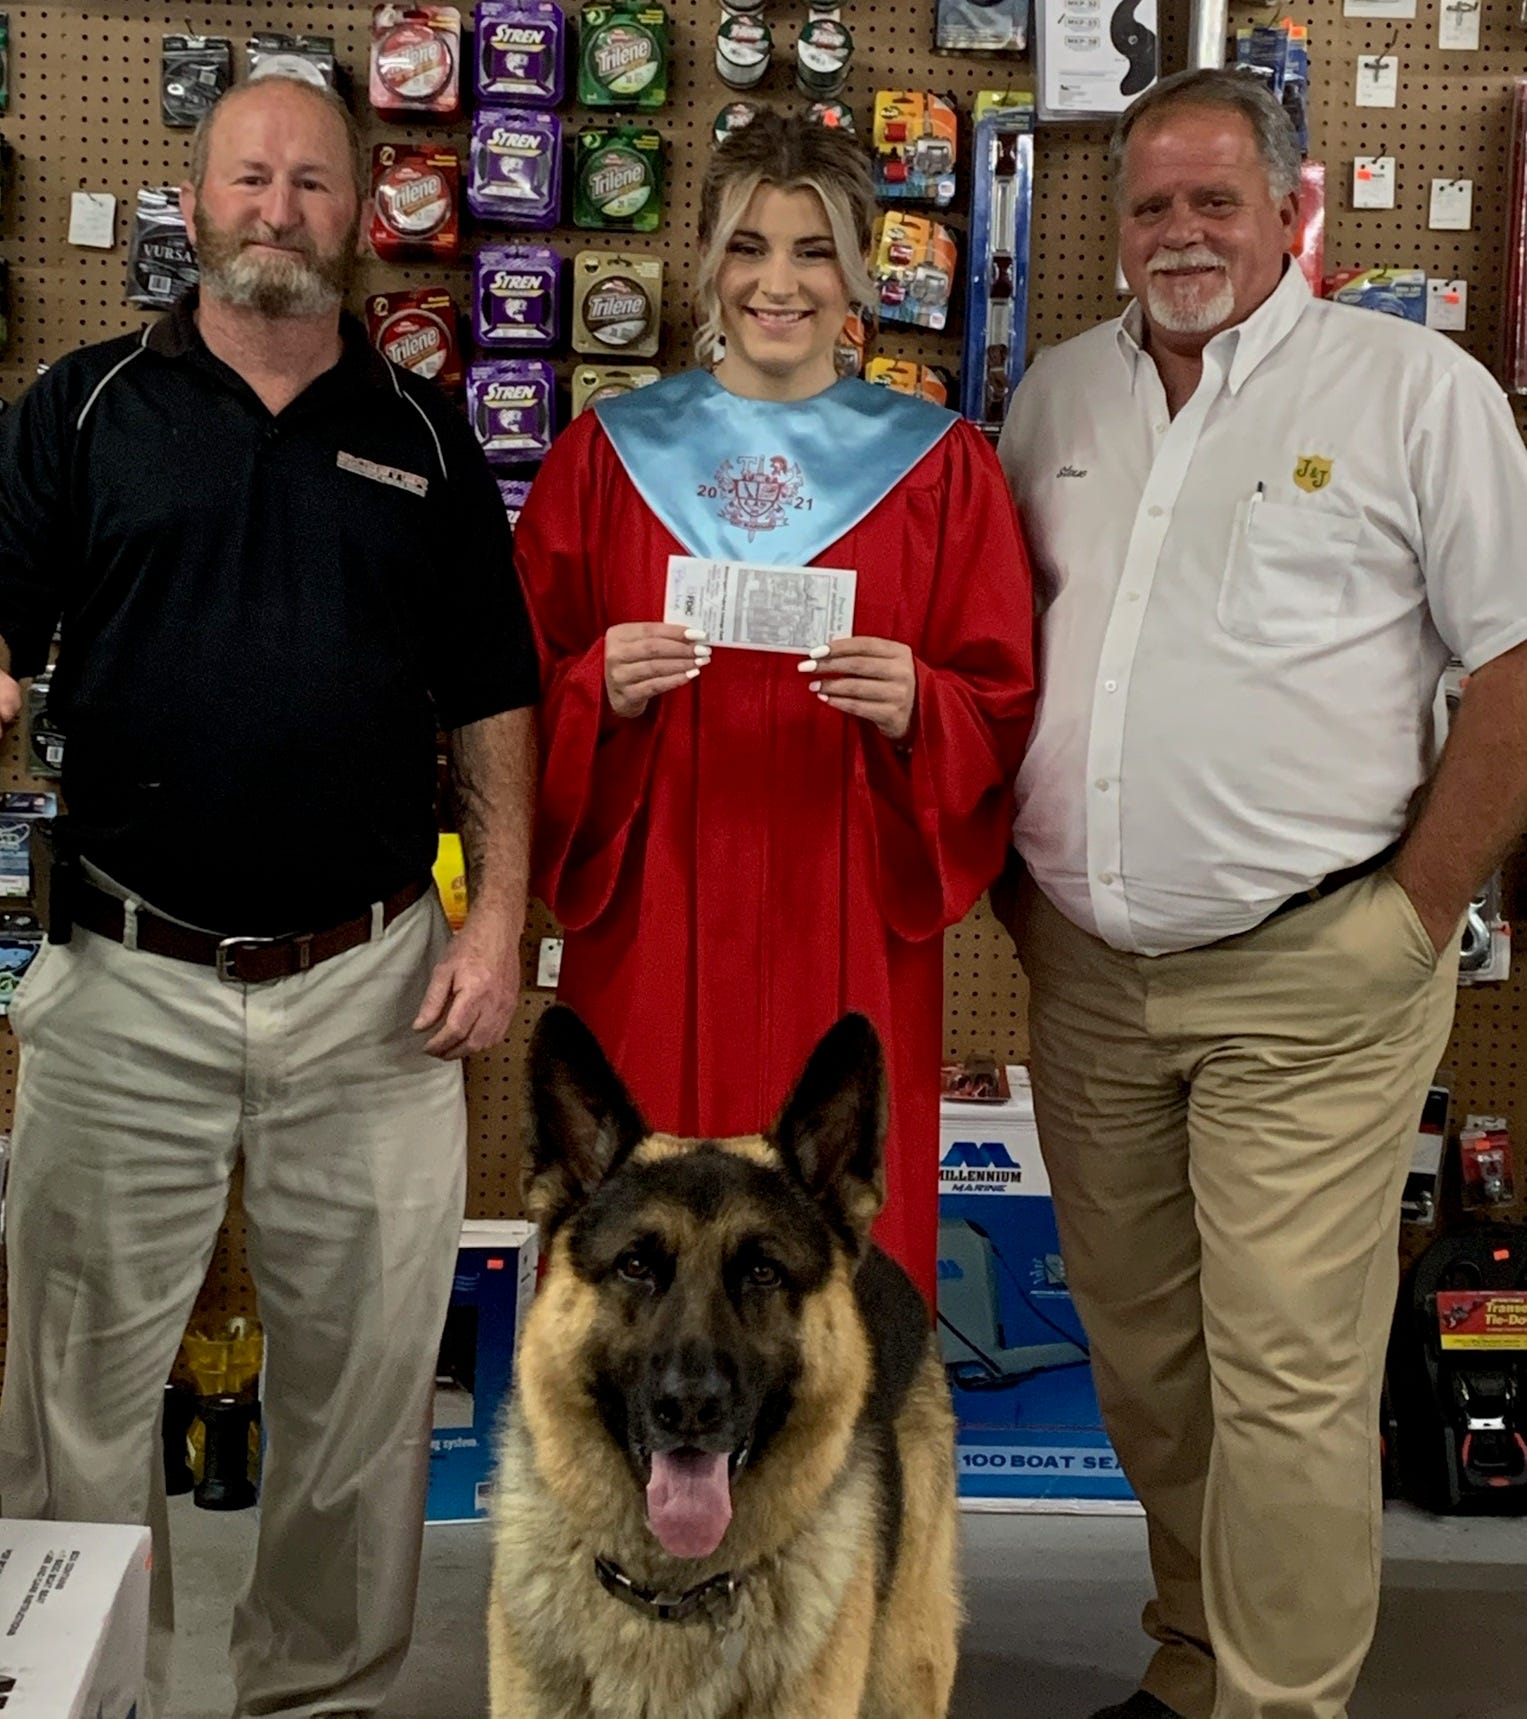 Pictured left to right, Jimmie Box – President, Bella Brister, Steve Burks – Vice President, and Gunny the German Shepherd